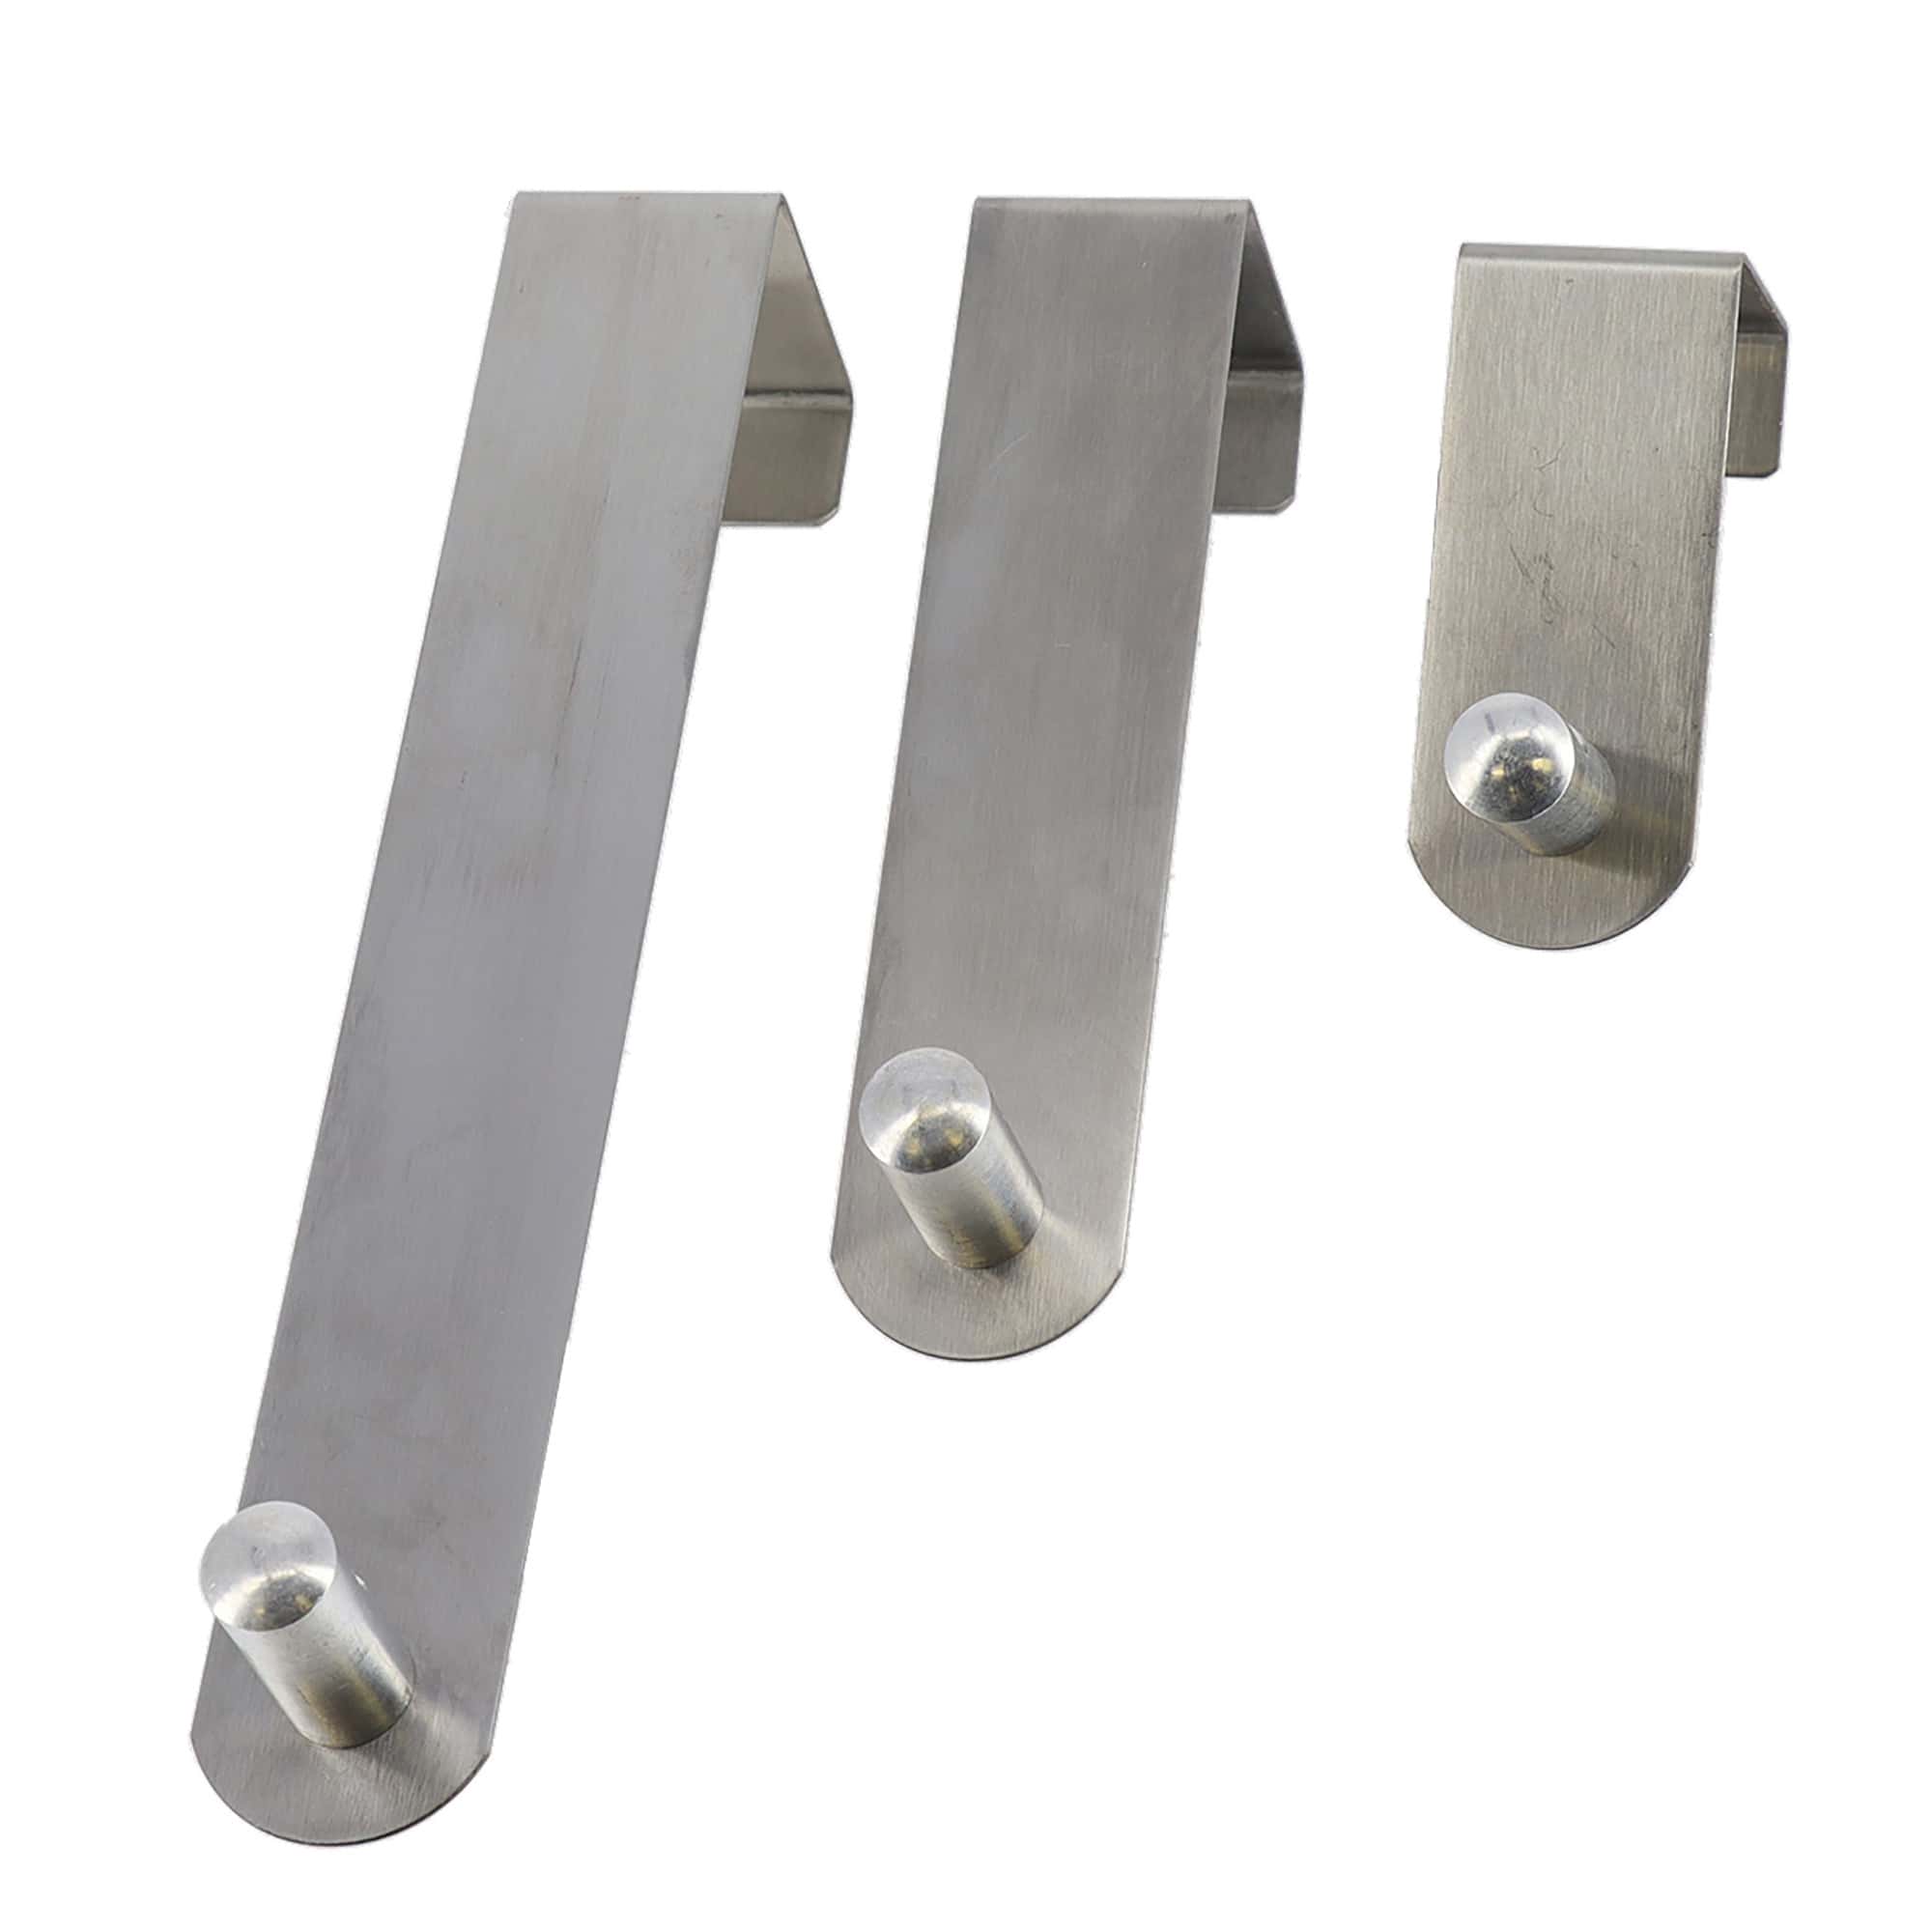 Stainless Steel Over-the-Door Hooks Set: A Trio of Metallic Hooks in a Brushed Finish, Showcasing Different Sizes for Various Needs, Isolated on a White Background for Clarity.